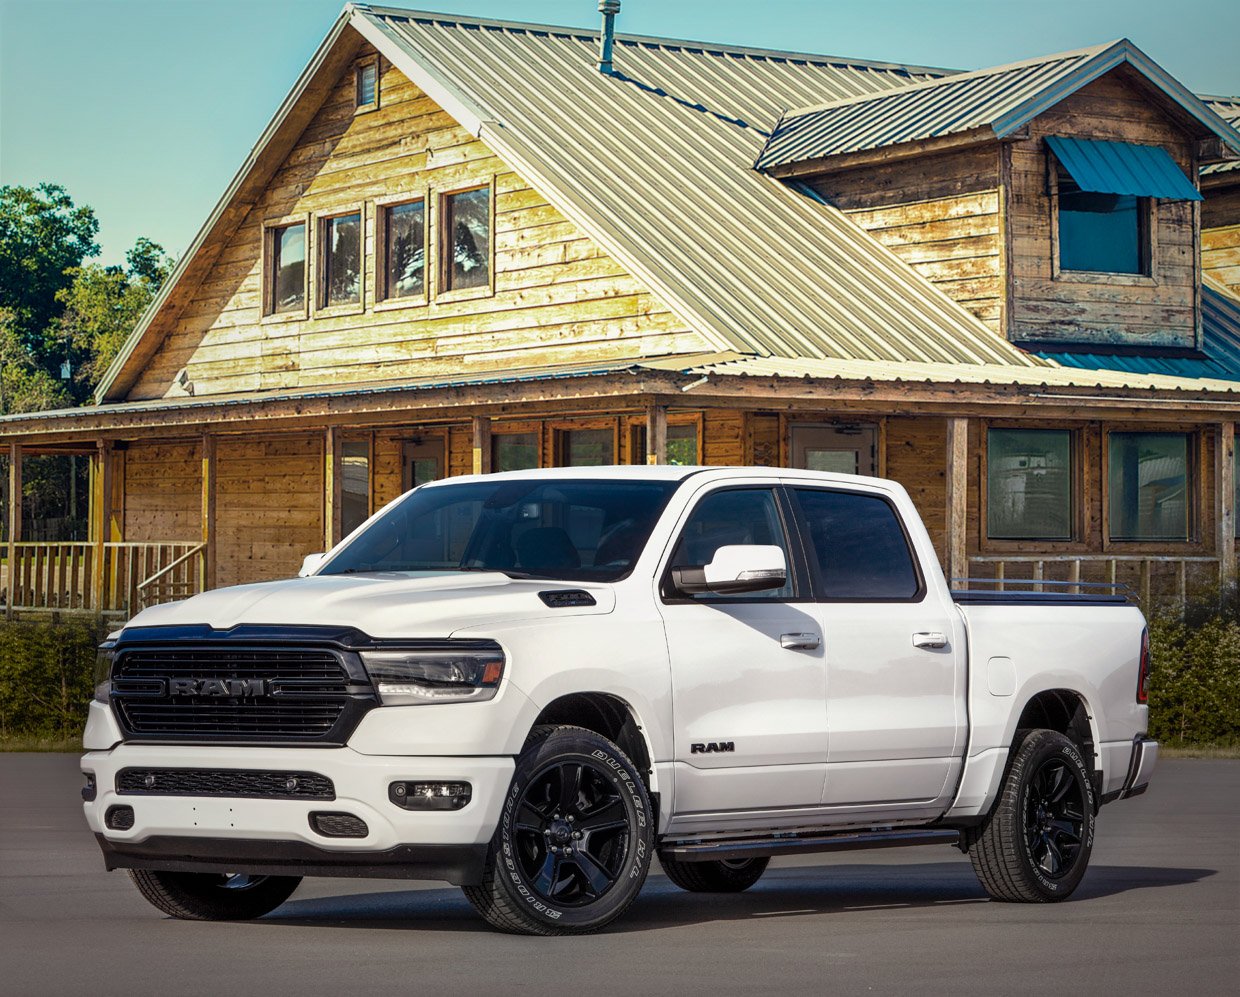 Ram 1500 Night Edition And Rebel Black Go To The Dark Side